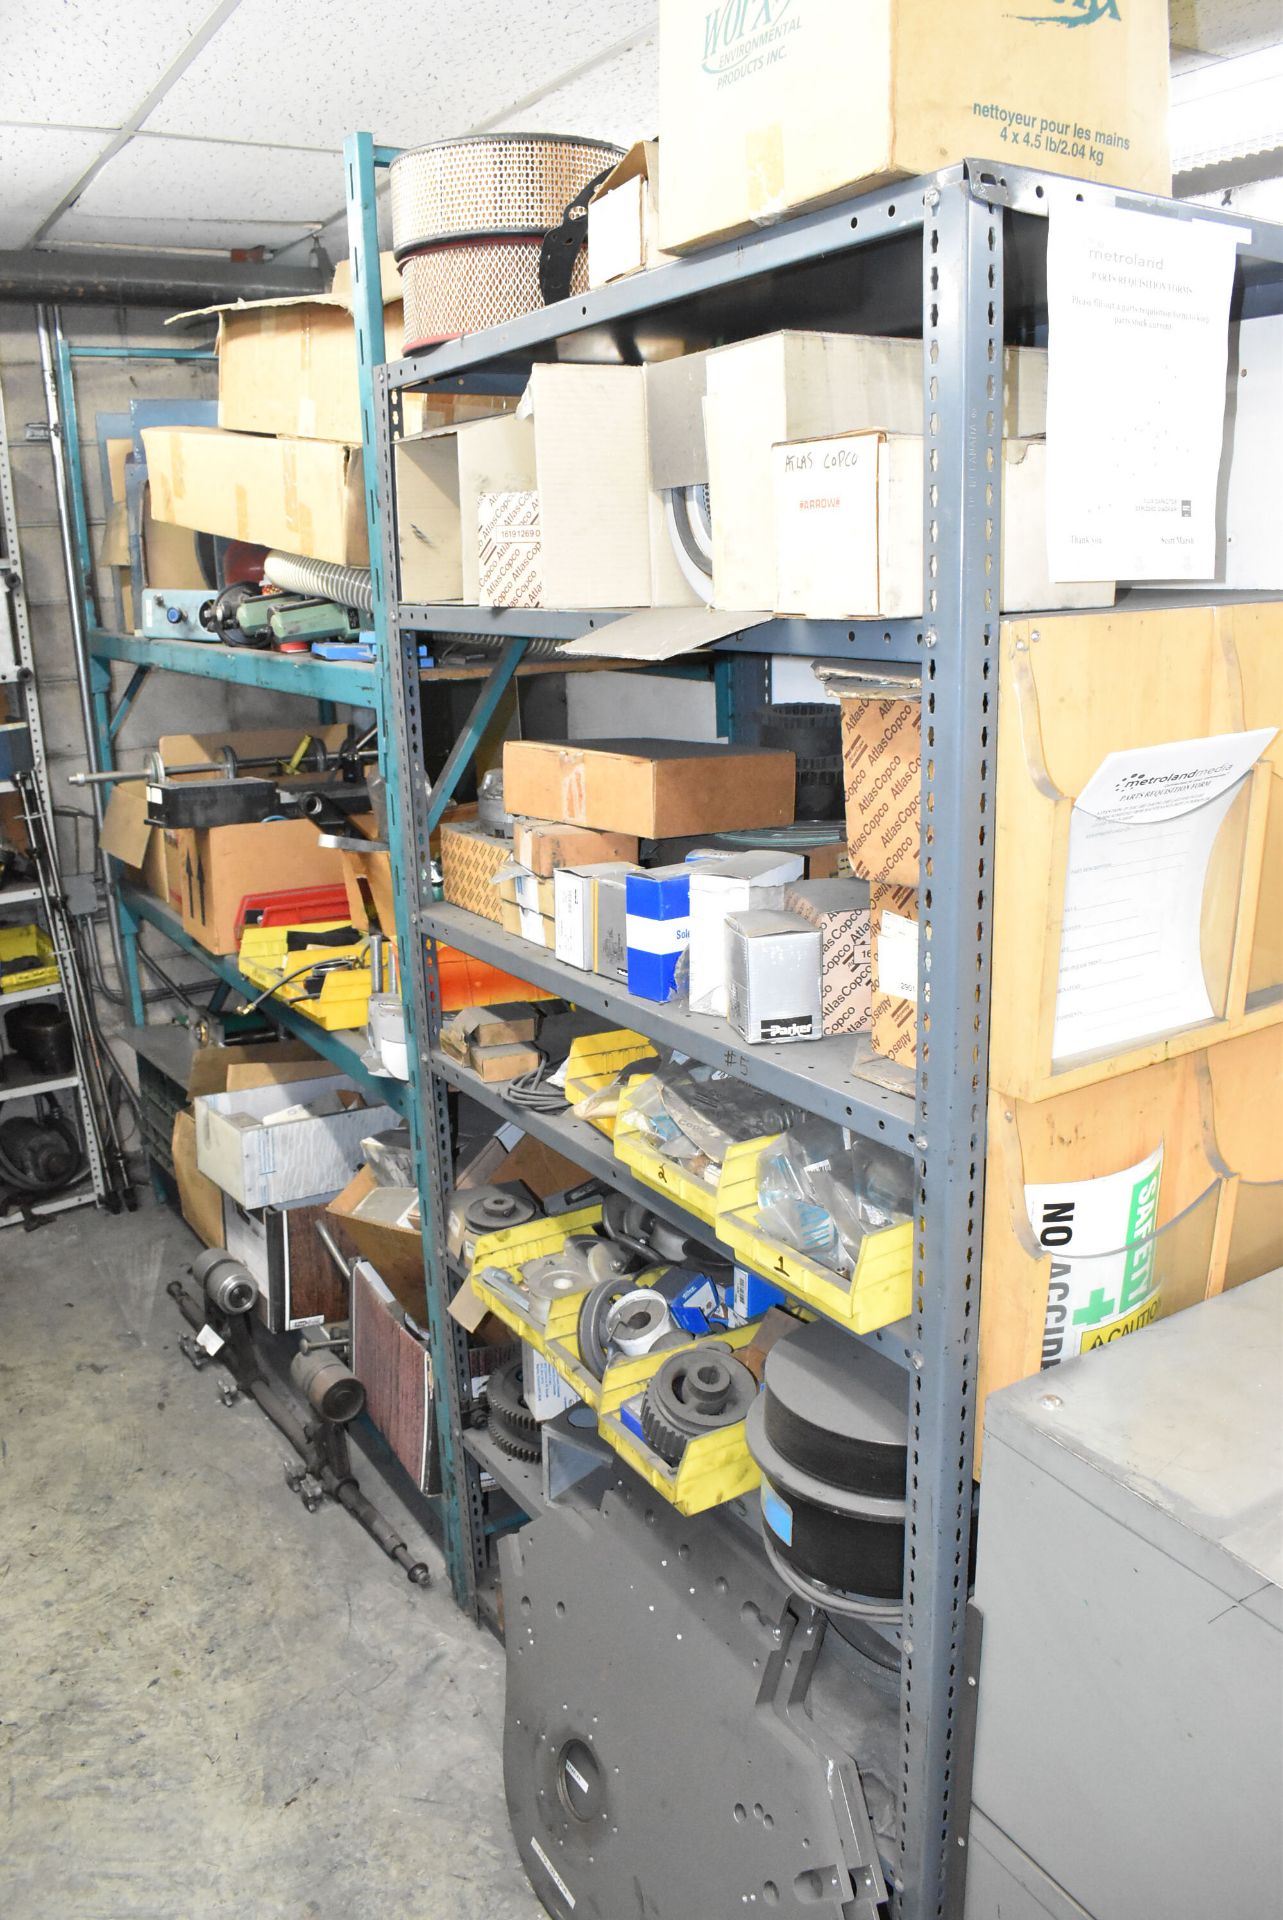 LOT/ (2) SECTIONS OF STEEL SHELVING WITH CONTENTS - INCLUDING AIR FILTERS, SPROCKETS, GEARS, BELTS - Image 3 of 11